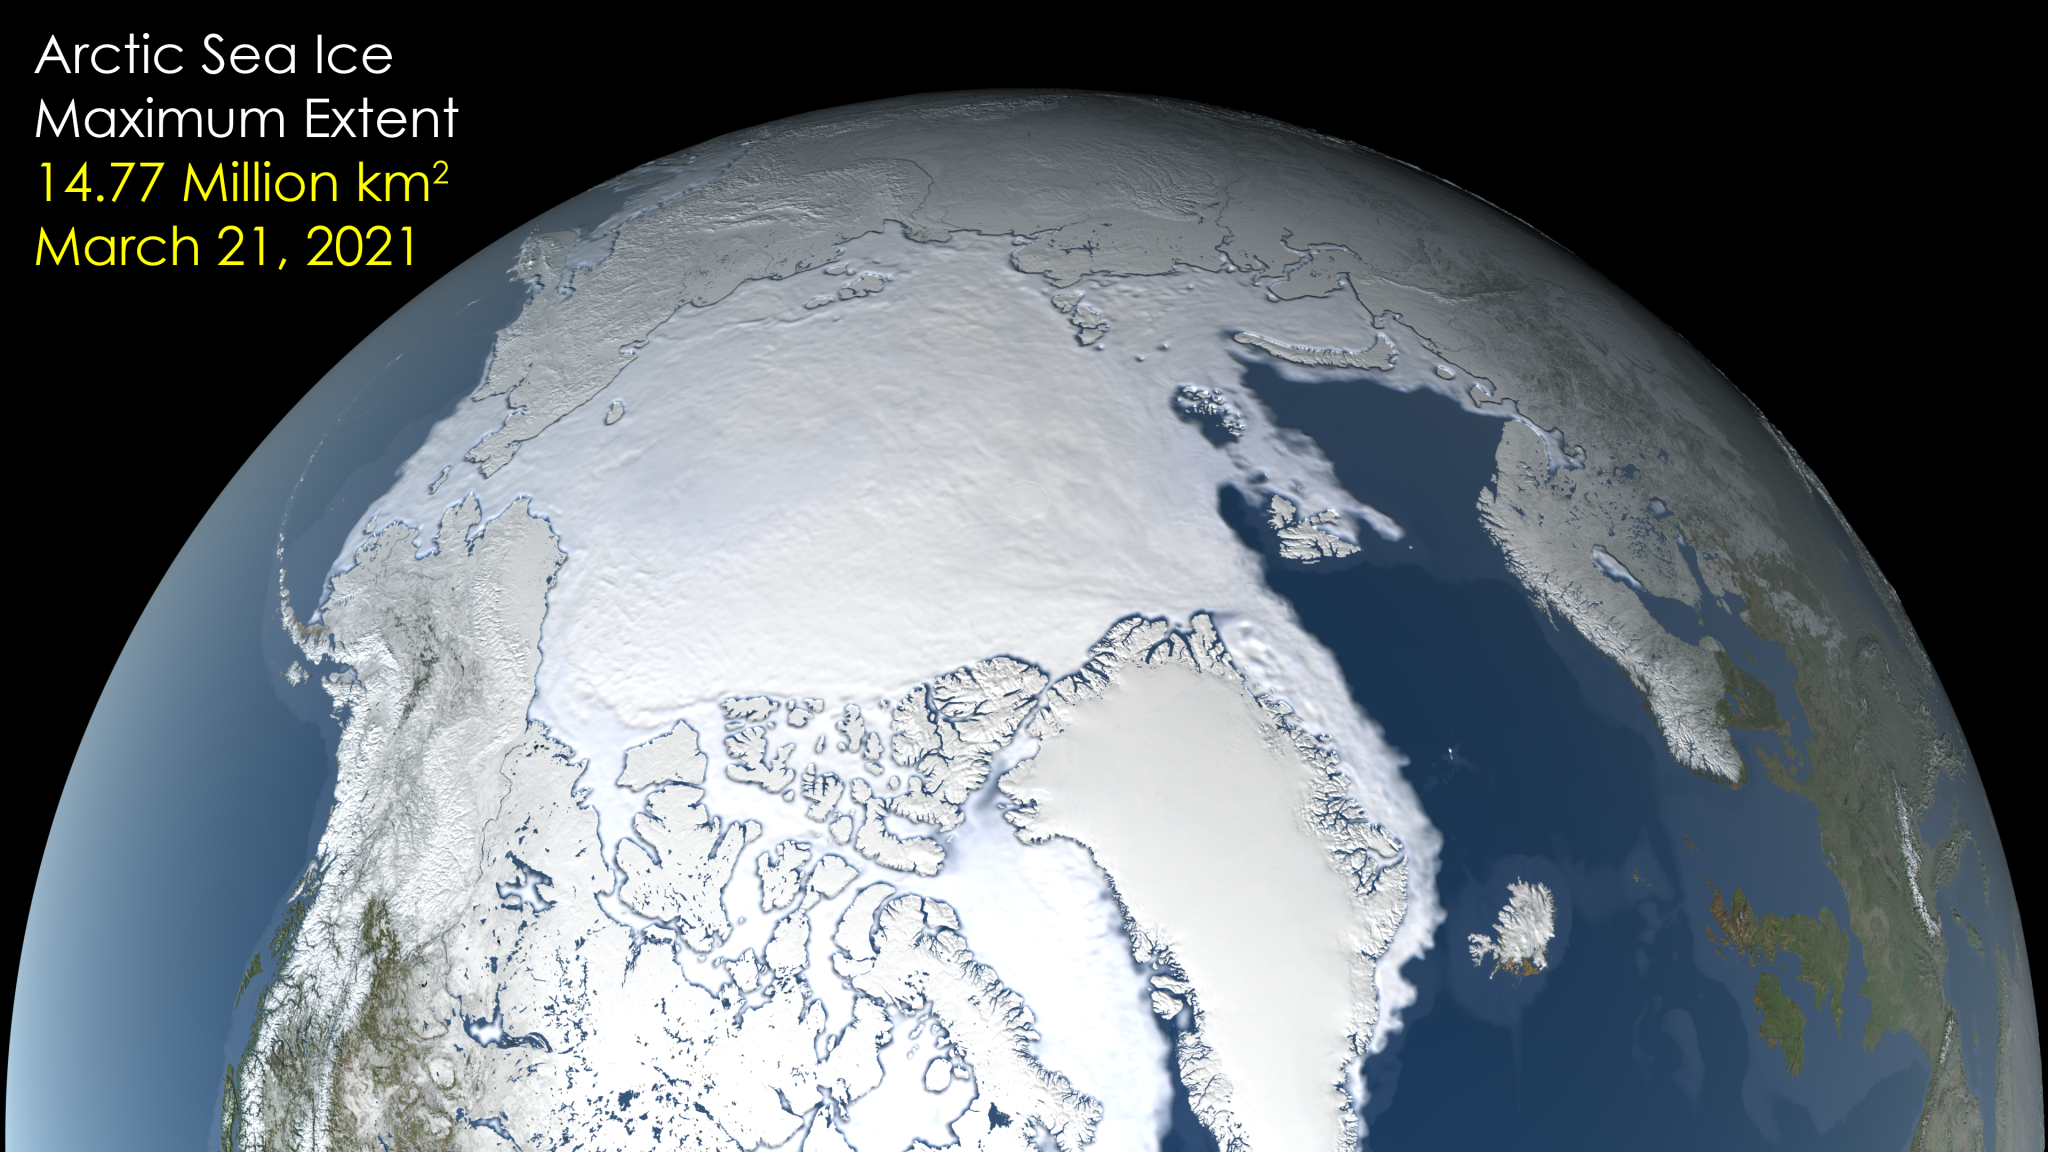 A visualization of the maximum sea ice extent for 2021. The graphic shows Earth as a half globe, looking down at the North Pole from an angle. Canada, Alaska, and Greenland are visible curving off screen at the bottom of the image, with Scandinavia and Northern Europe visible on the right side of the globe and Russia visible at the top. The space between Canada and Russia is filled with white sea ice, which also curves down along the east coast of Greenland.